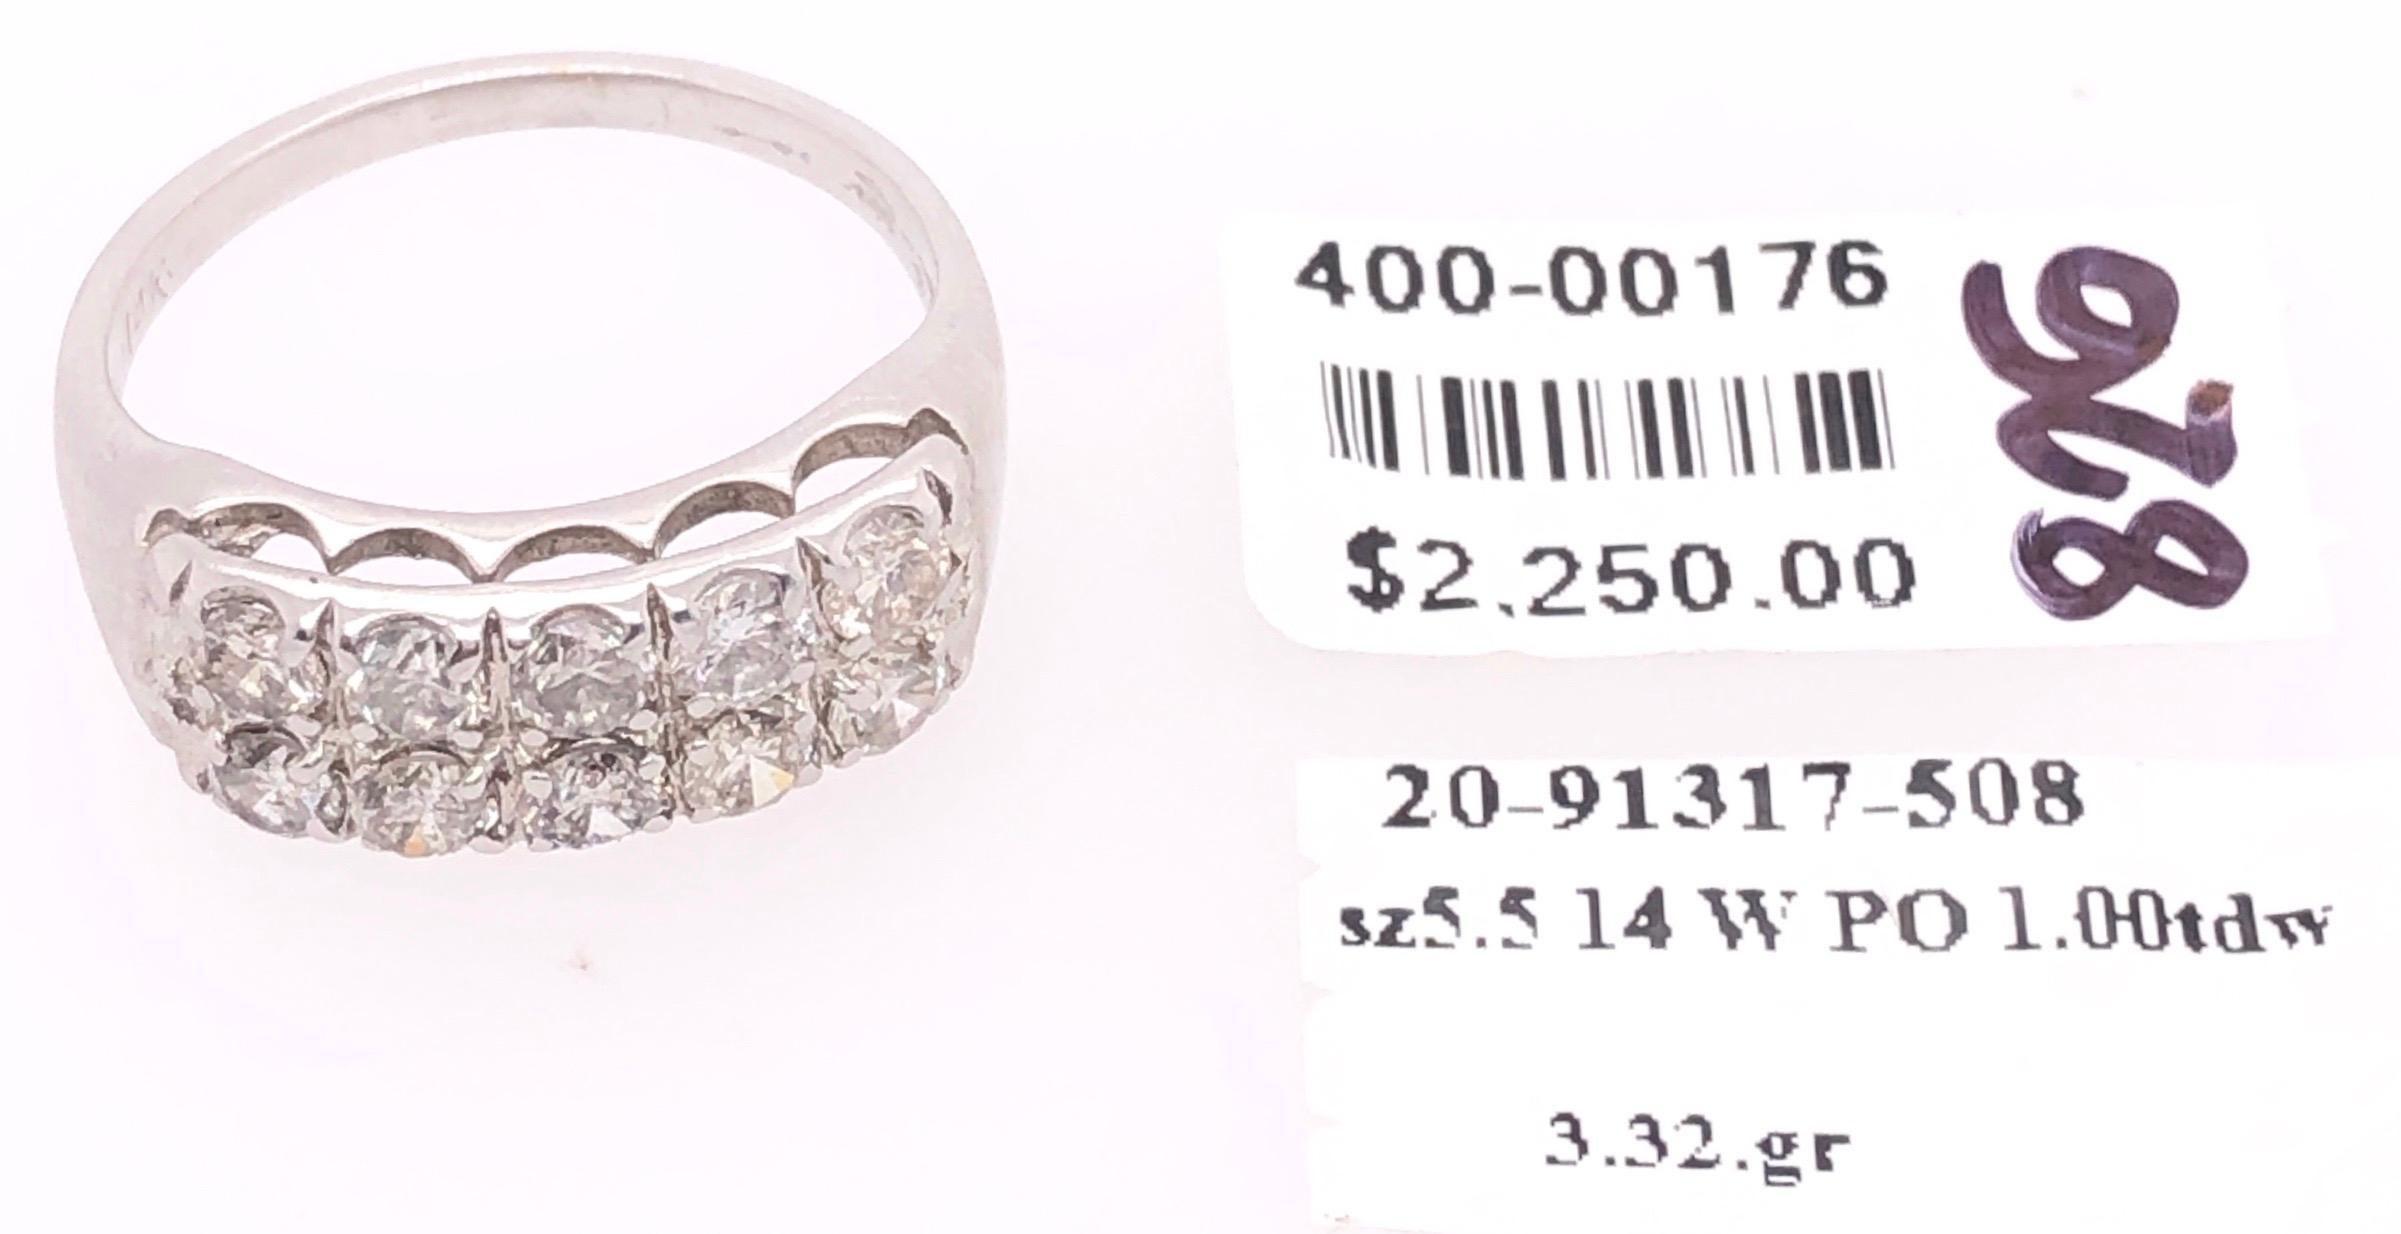 14 Karat White Gold Contemporary Diamond Band Bridal Ring 1.00 Total Diamond Weight.
Size 5.5
3.32 grams total weight.